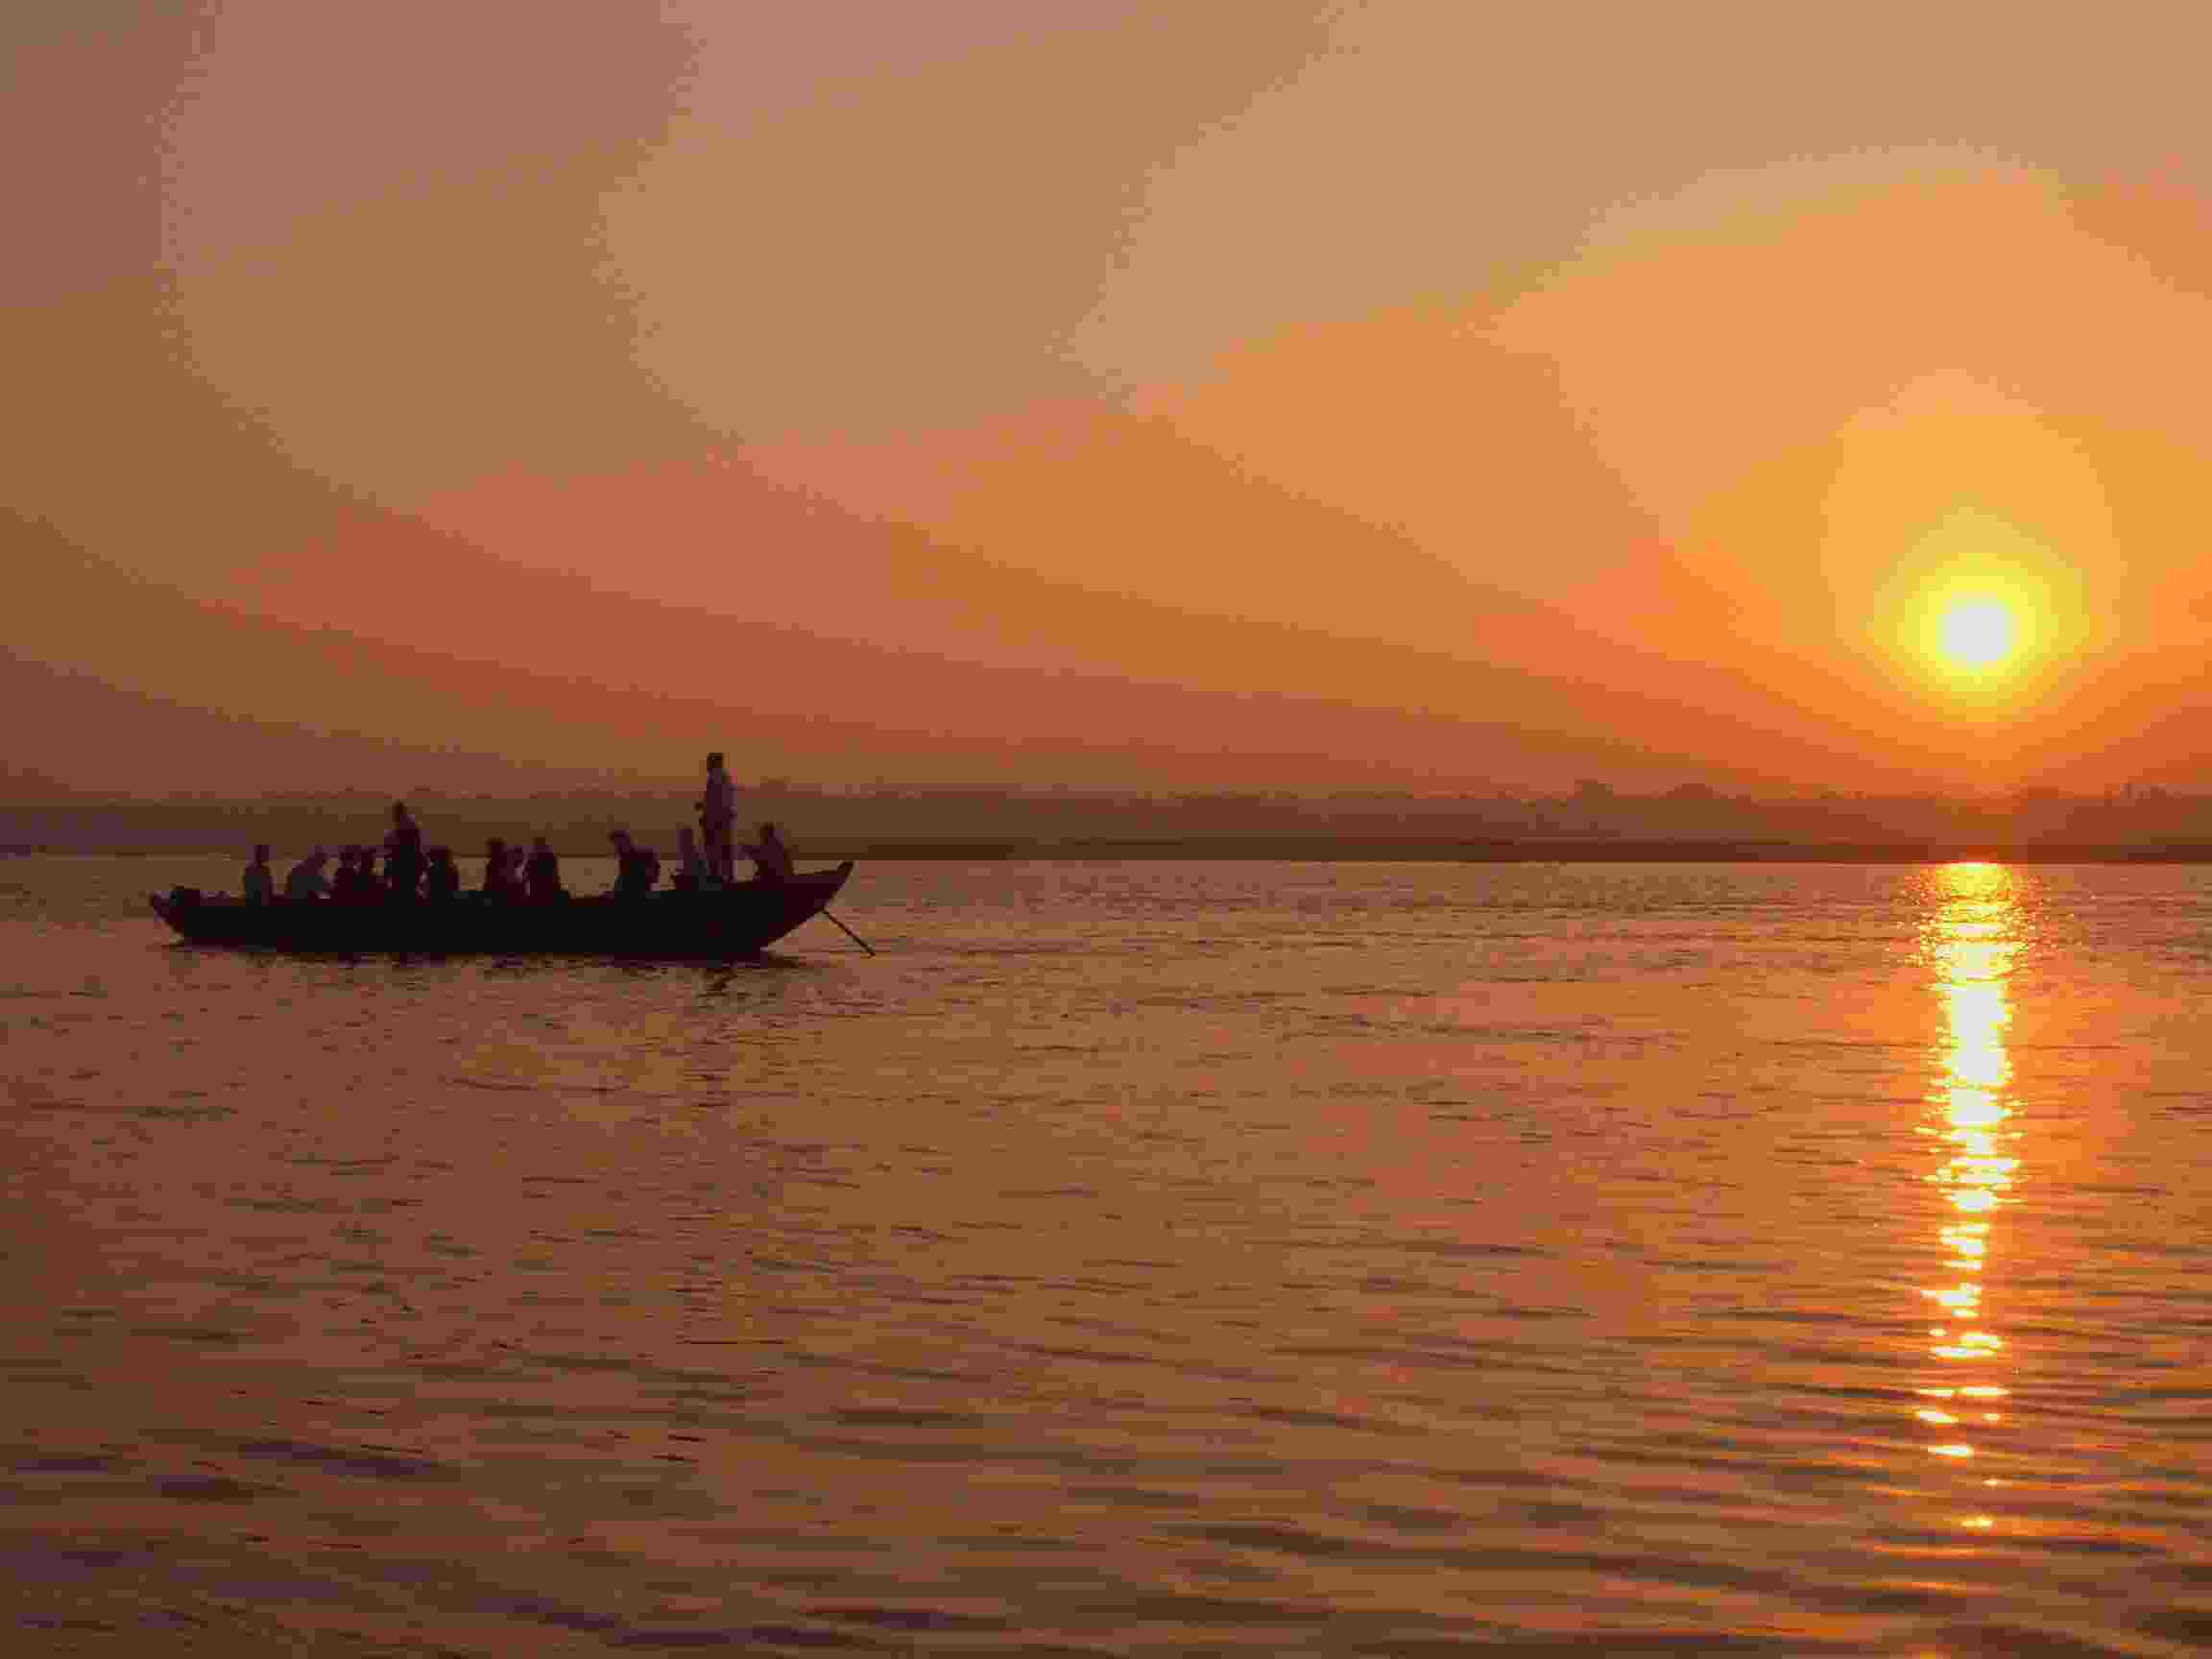 The silhouette of a boat filled with several people against the orange dawn sky and silver-coloured water